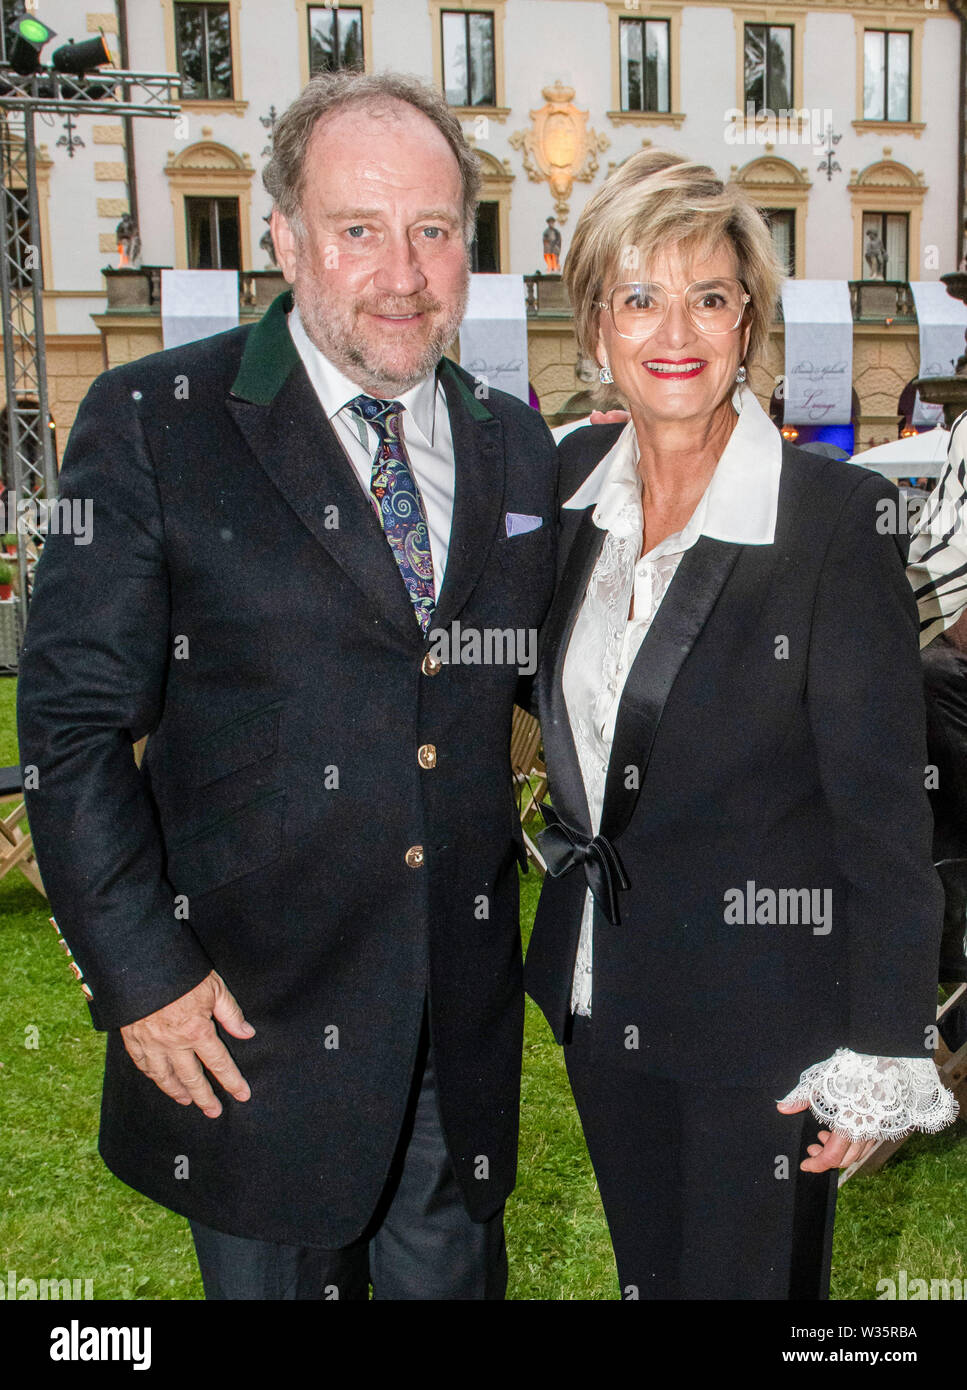 Regensburg, Germany. 12th July, 2019. Gloria von Thurn und Taxis and Harold Faltermeyer, composer, are about to open the Thurn-und-Taxis Castle Festival in the garden of the Princely Castle of St. Emmeram. With a mixture of classical music, pop, rock, musical and theatre, the Schlossfestspiele has been attracting around 30,000 visitors to the Upper Palatinate every year since 2003, according to the figures. Credit: Armin Weigel/dpa/Alamy Live News Stock Photo